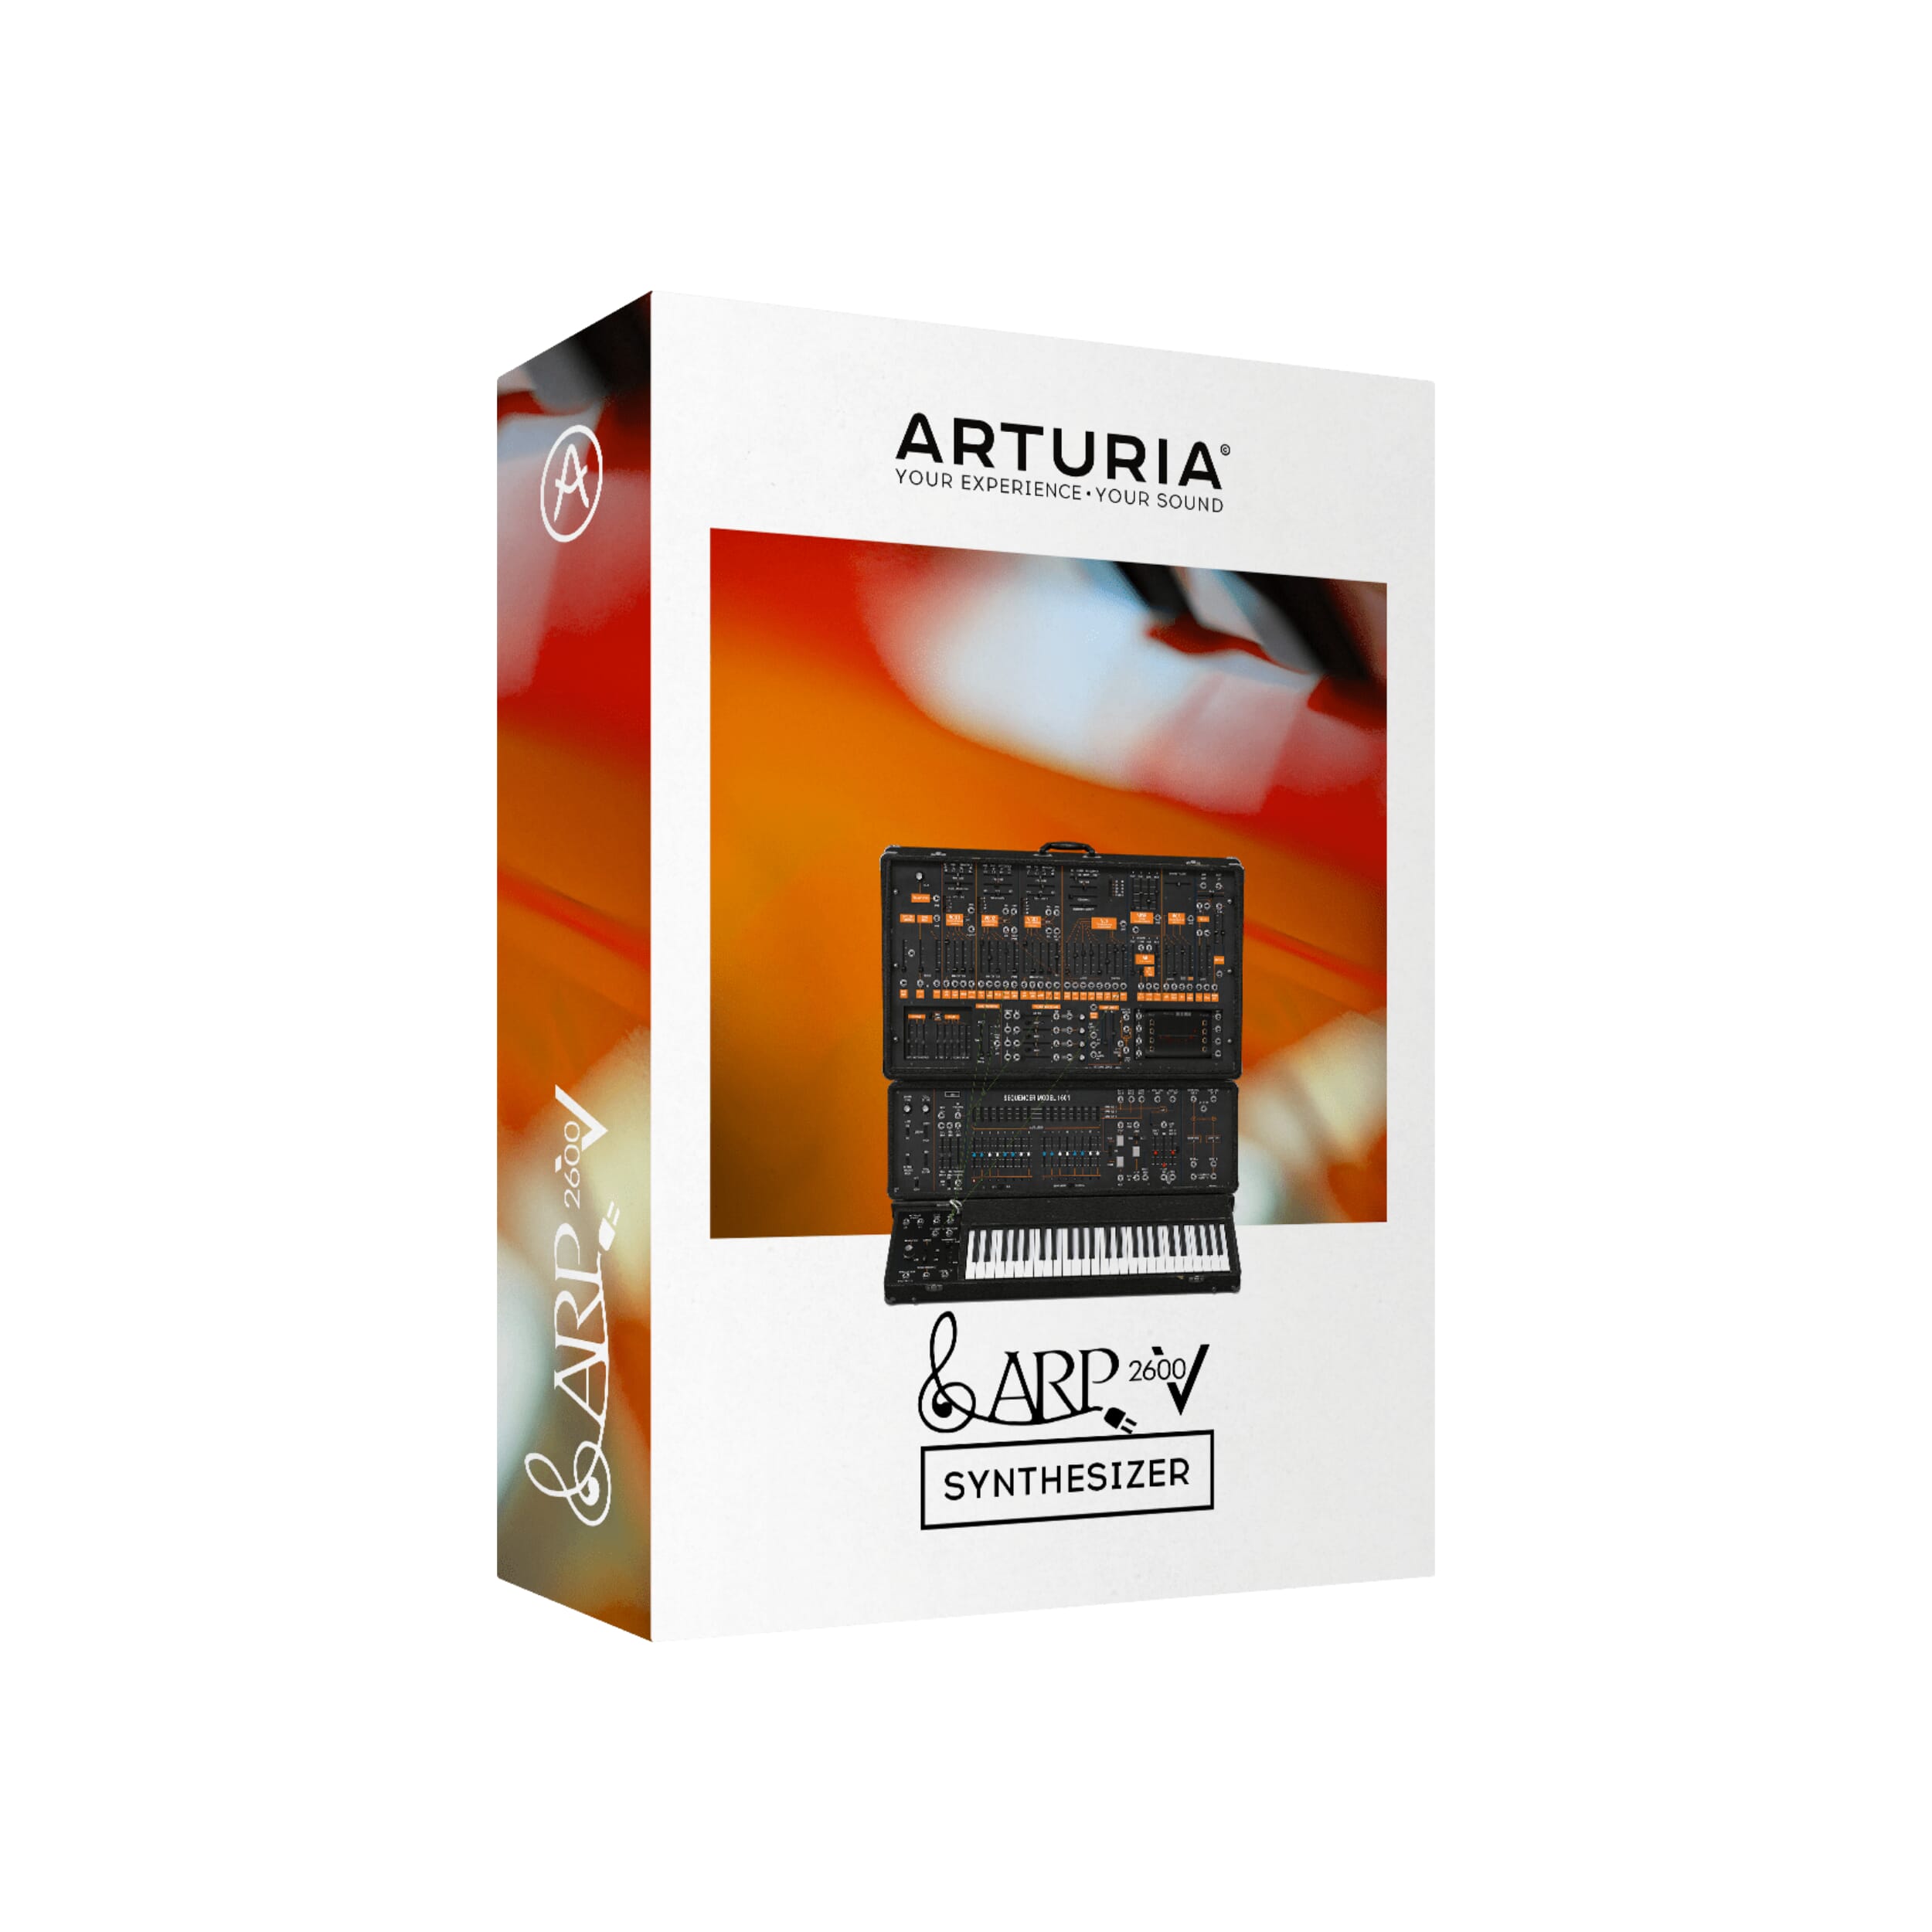 Arturia ARP 2600 V download the new for android